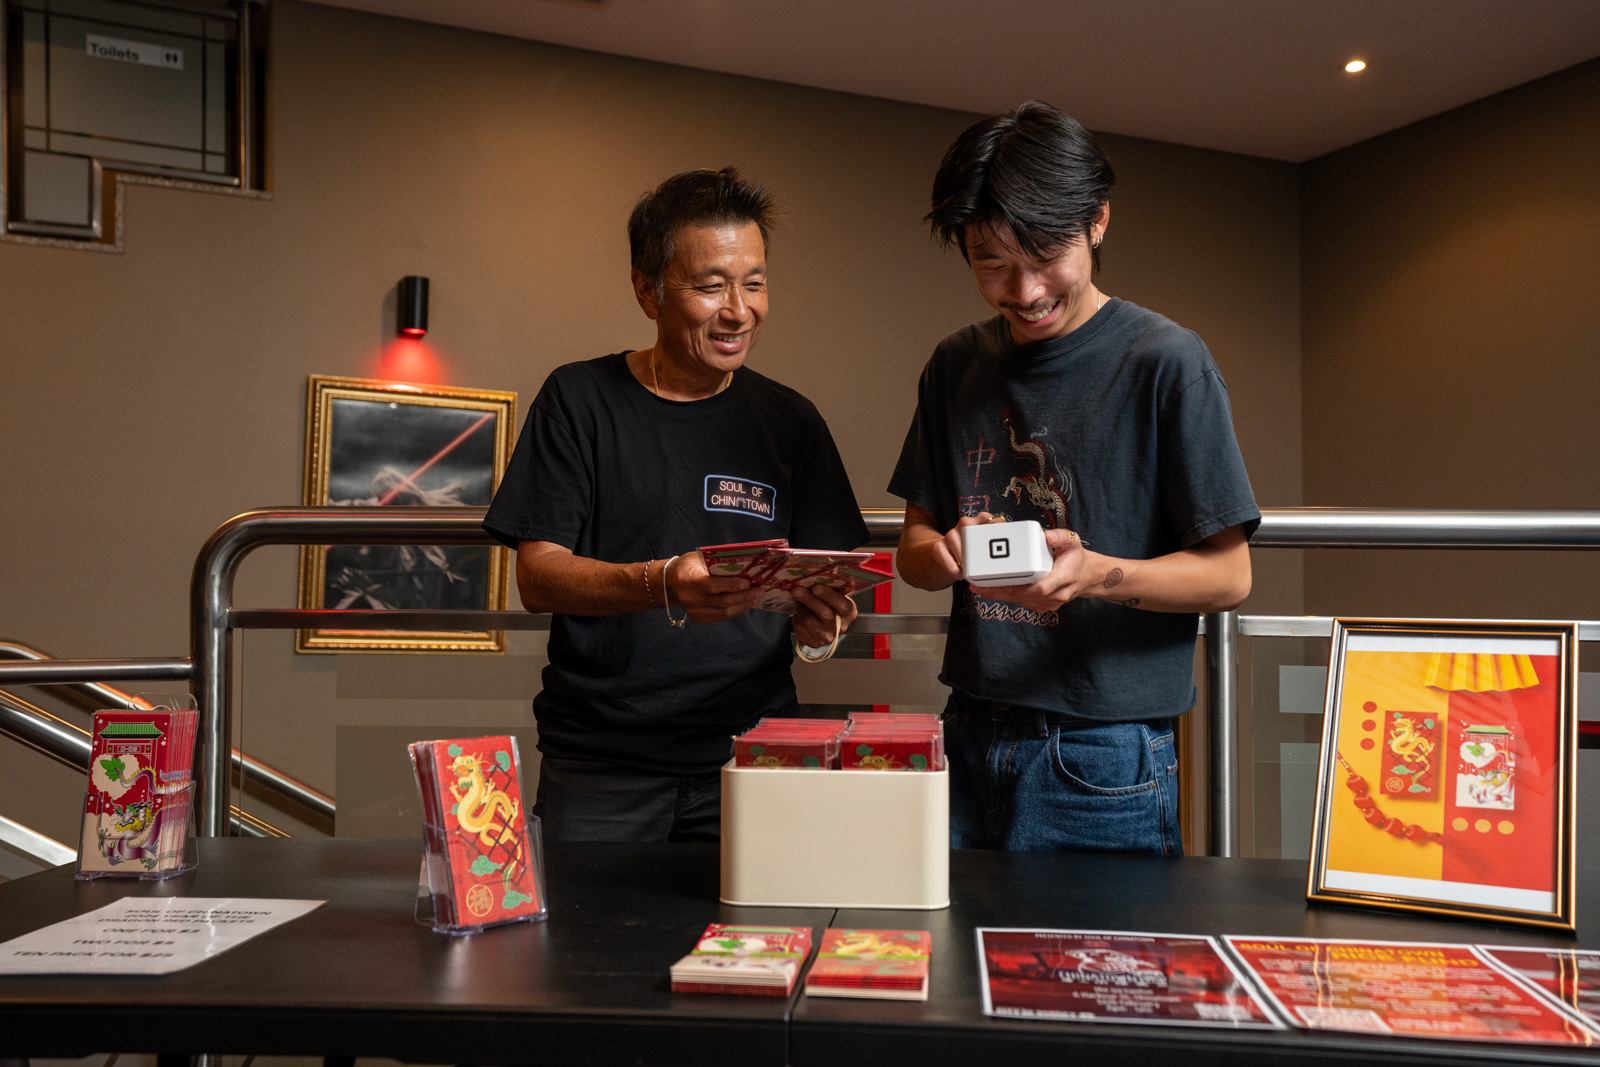 Two people standing behind a table, one holding chinese red packets and the other holding a Square Terminal